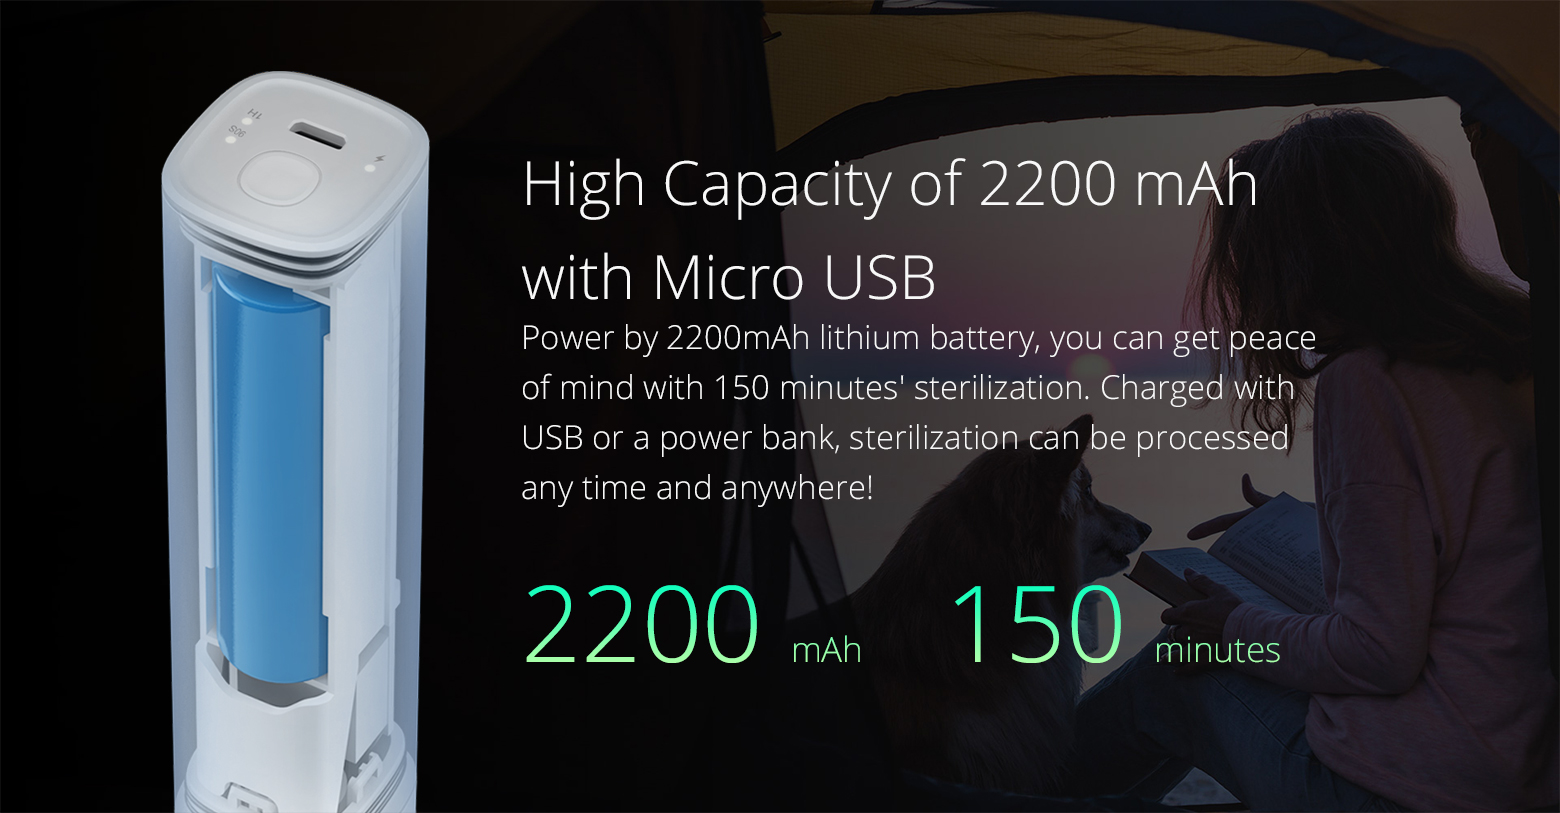 High Capacity of 2200 mAh with Micro USB Power by 2200mAh lithium battery, you can get peace of mind with 150 minutes' sterilization. Charged with USB or a power bank, sterilization can be processed any time and anywhere!